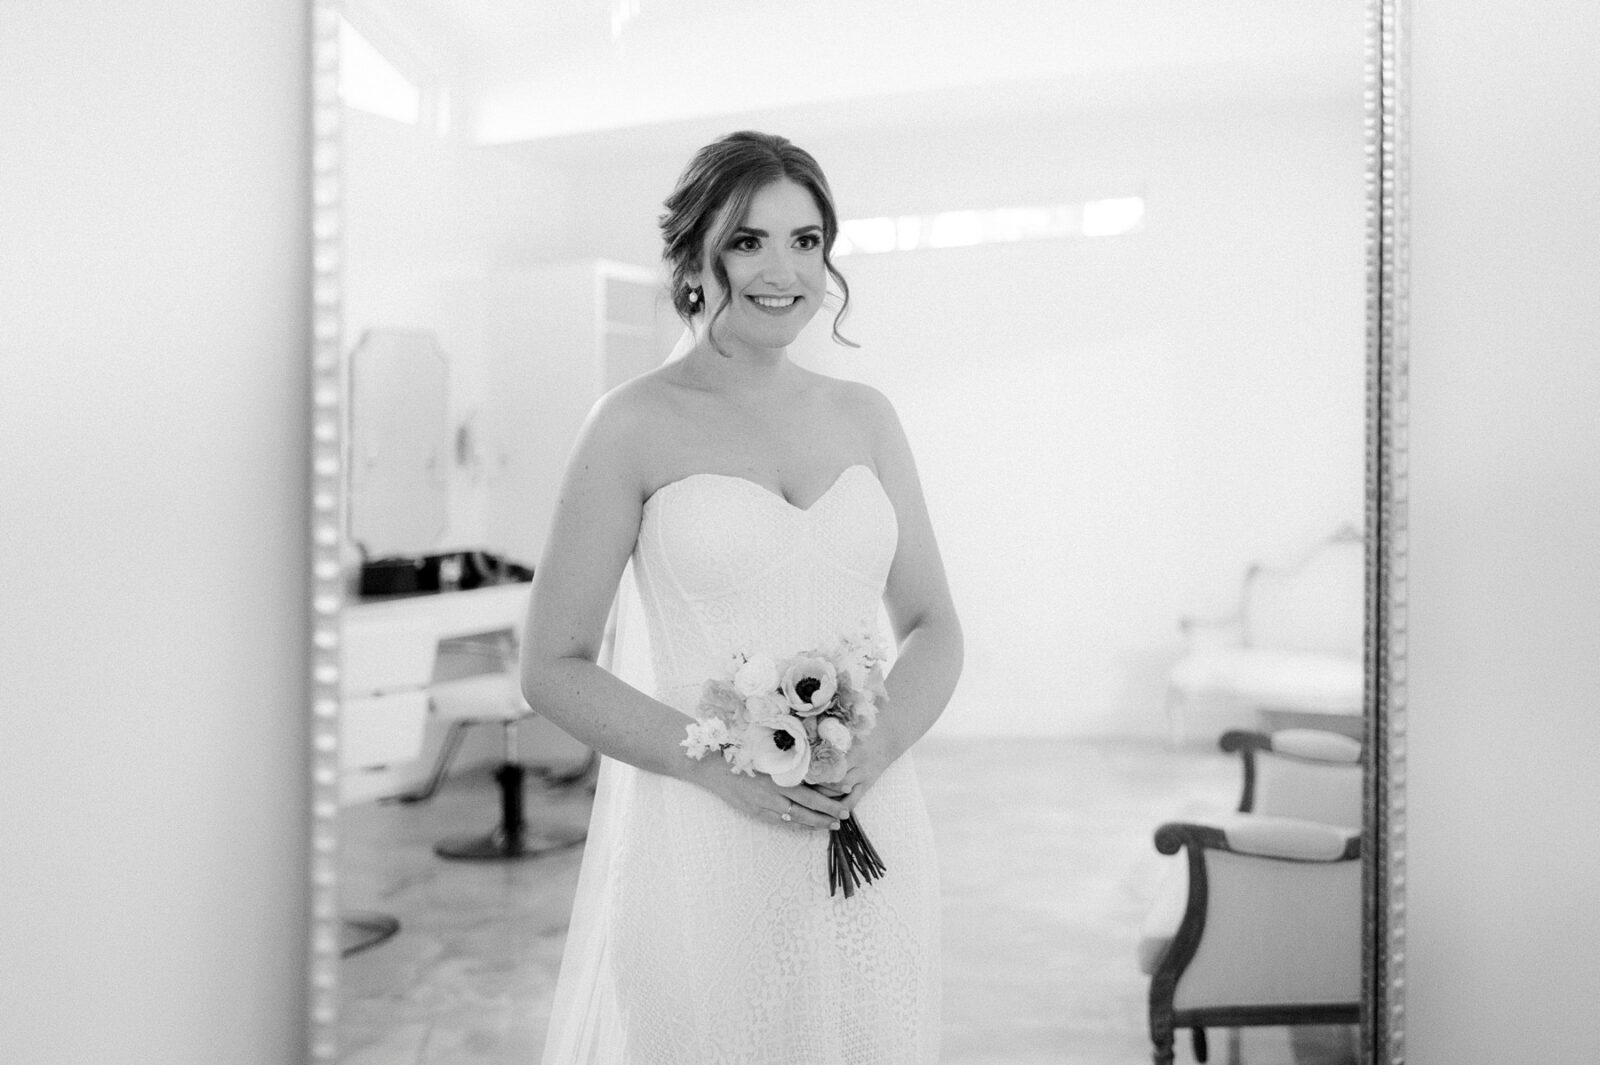 black and white bridal photos, bride looking in mirror, bridal suite at the videre, bridal session, bride photography, the videre estate, hill country wedding venue, wimberley wedding venue, austin wedding photography, tara paige weddings, 